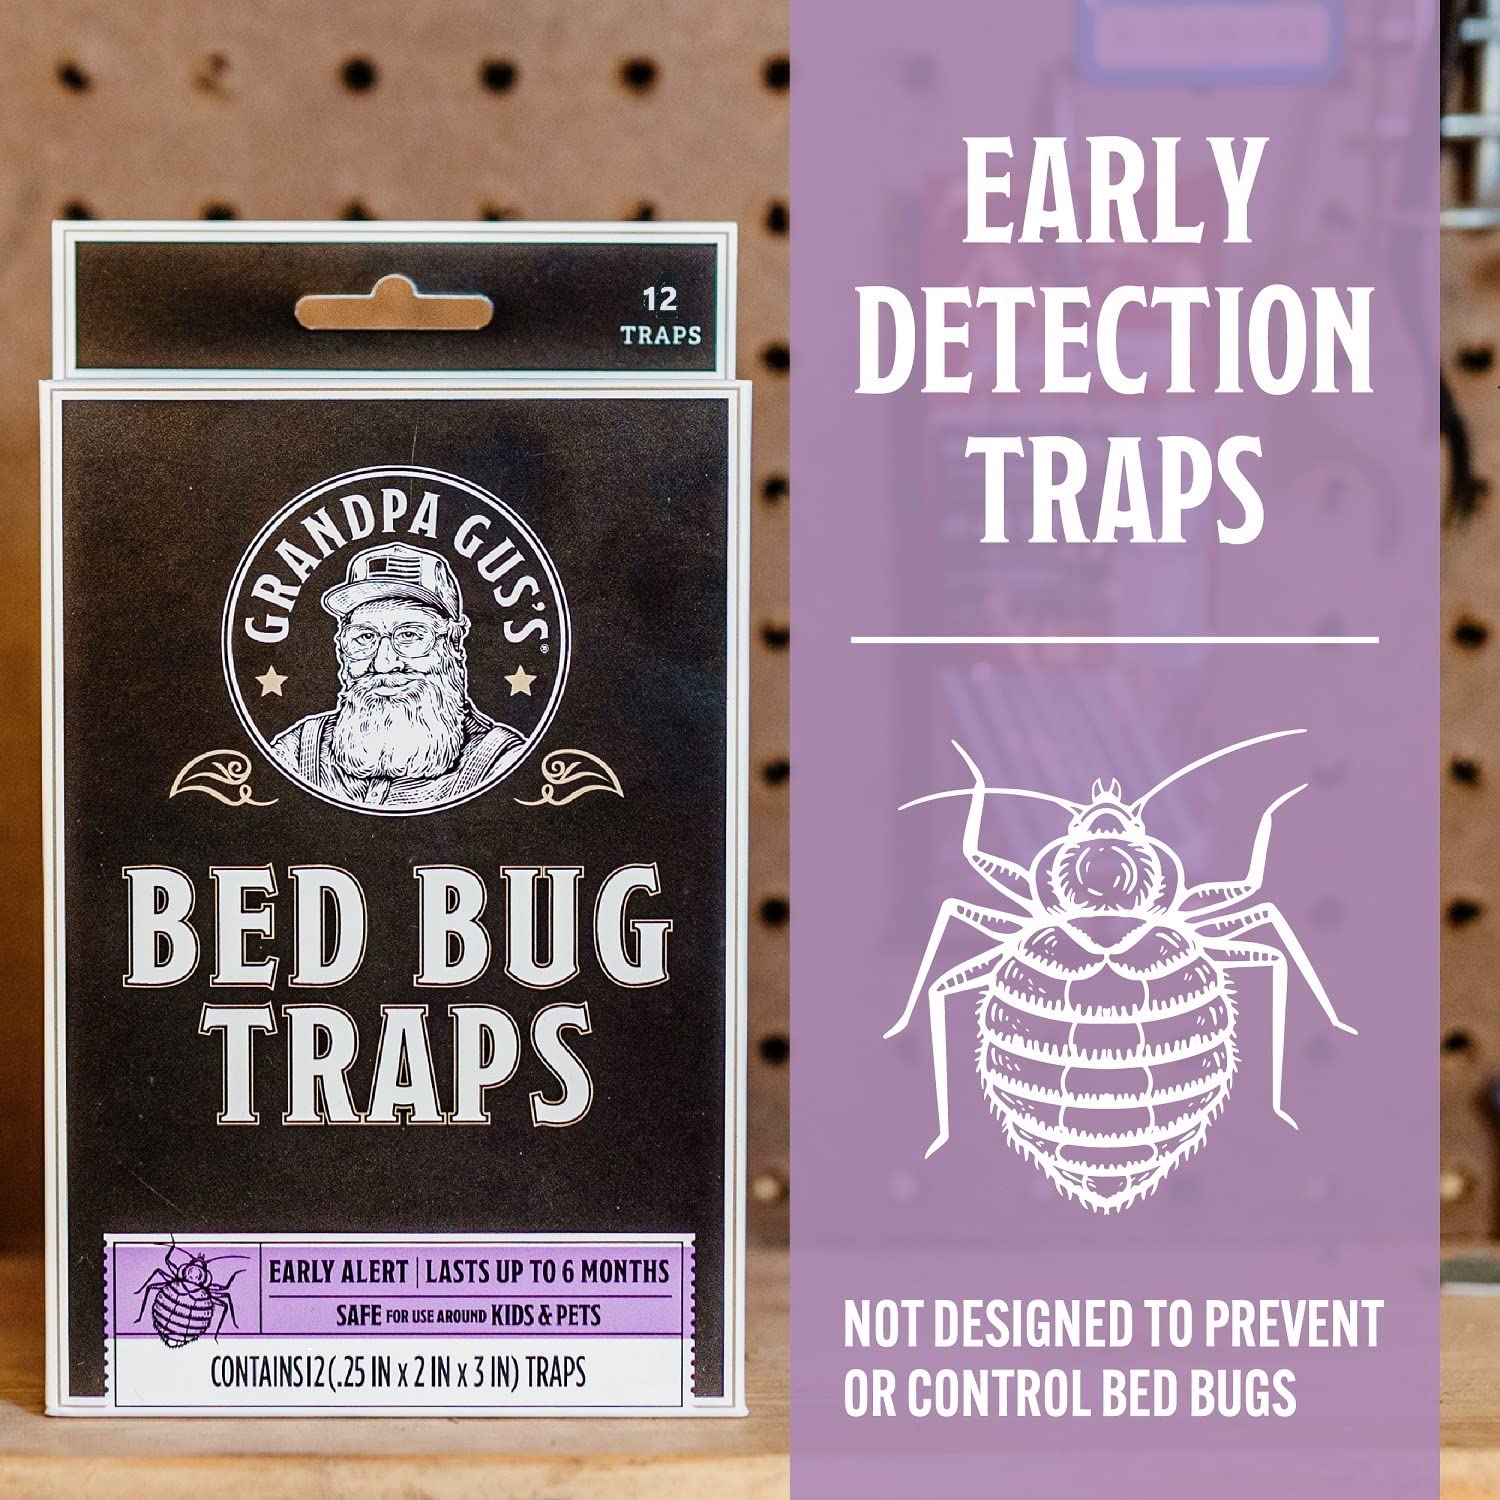 Grandpa Gus's Bed Bug Glue Traps for Home & Travel, Early Detection, Lasts up to 6 Months, Small & Discreet Patented Crush-Proof Design (Pack of 12)